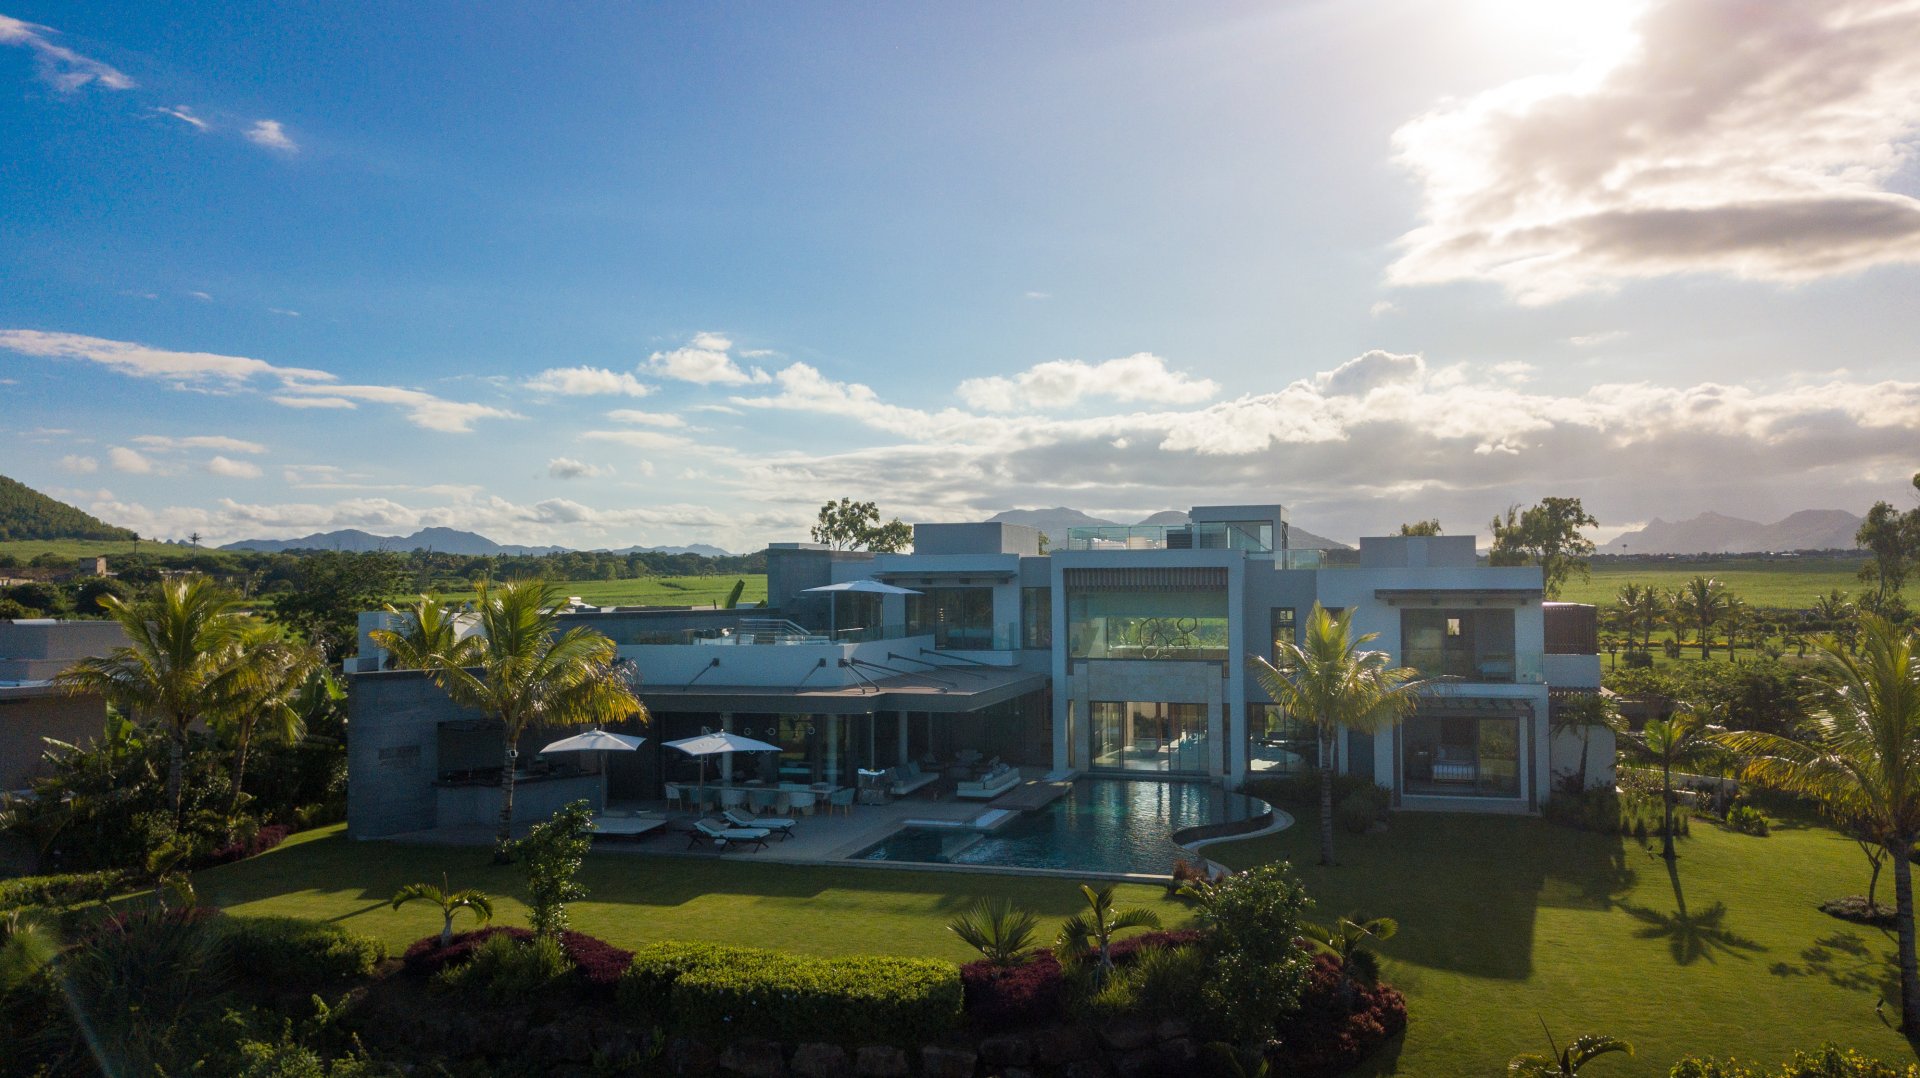 What are the prospects for real estate in Mauritius?